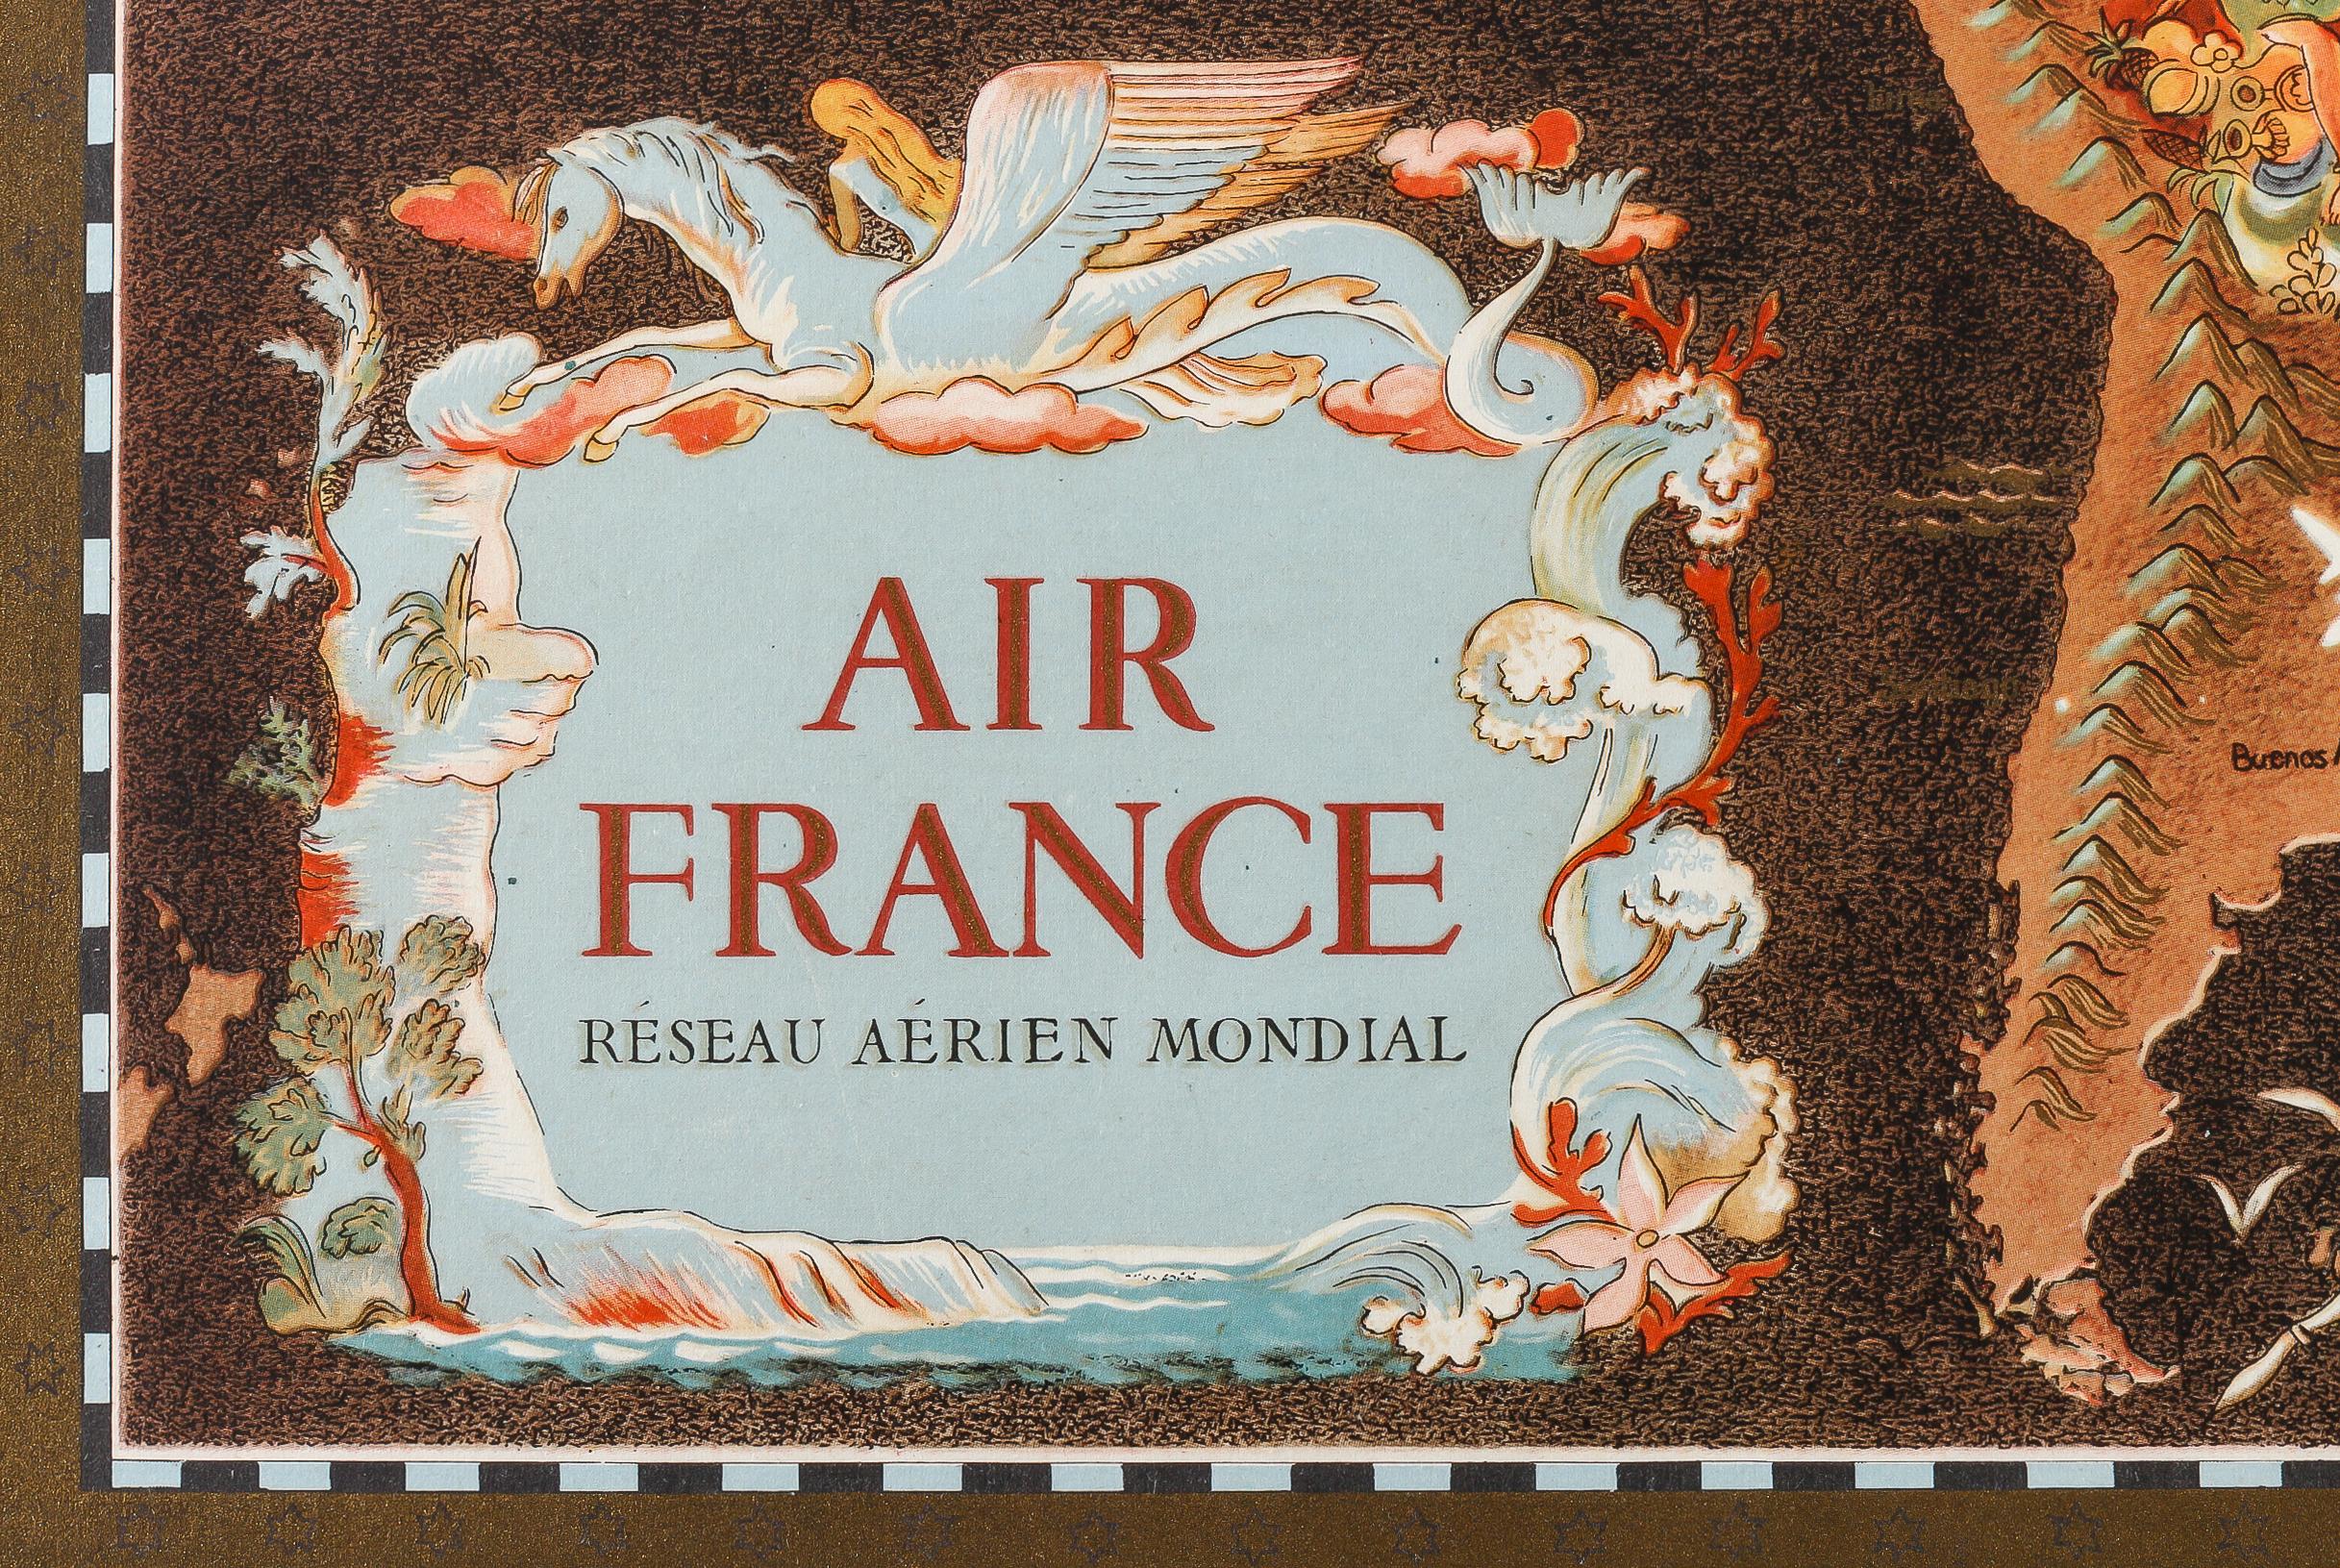 Planisphere Air France from 1948 to promote world tourism through the famous French airline.

Artist: Lucien Boucher  (1899-1971)
Title:  Air France – Réseau aérien mondial
Date: 1948
Size: 24.7 x 15.4 in. / 62.7 x 39.2 cm.
Printer: Perceval -